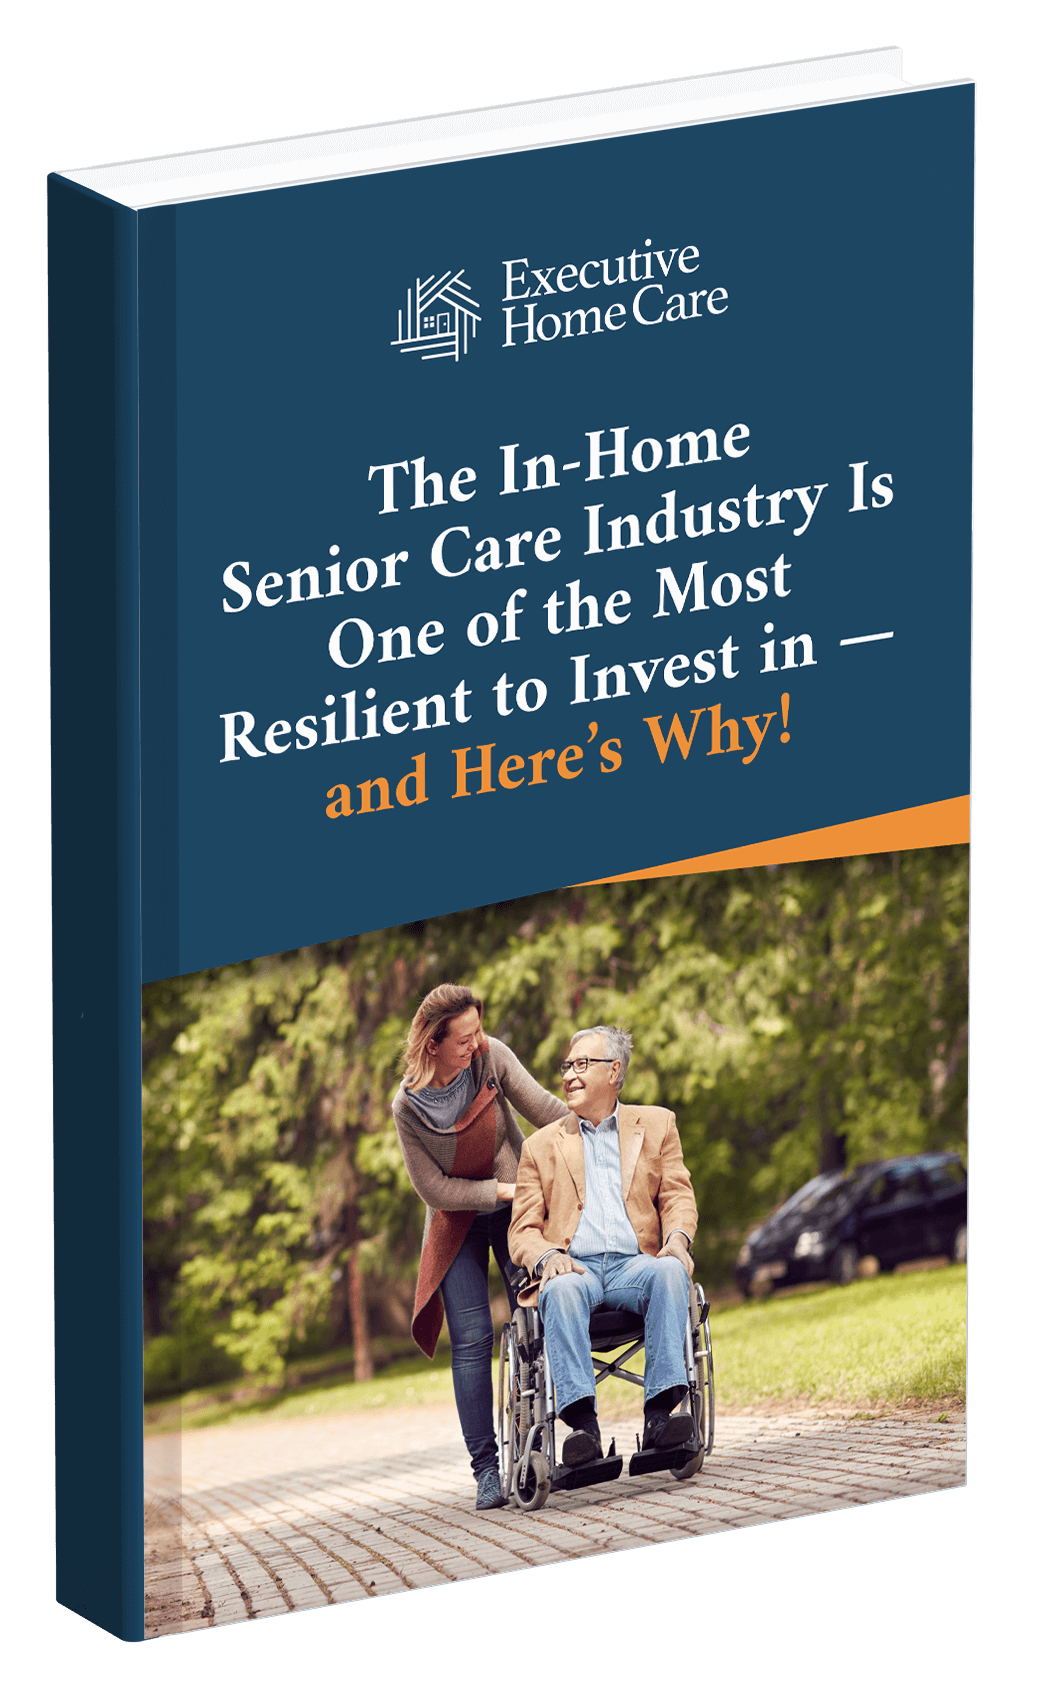 Know why the in-home senior care industry is one of the most resilient to invest.